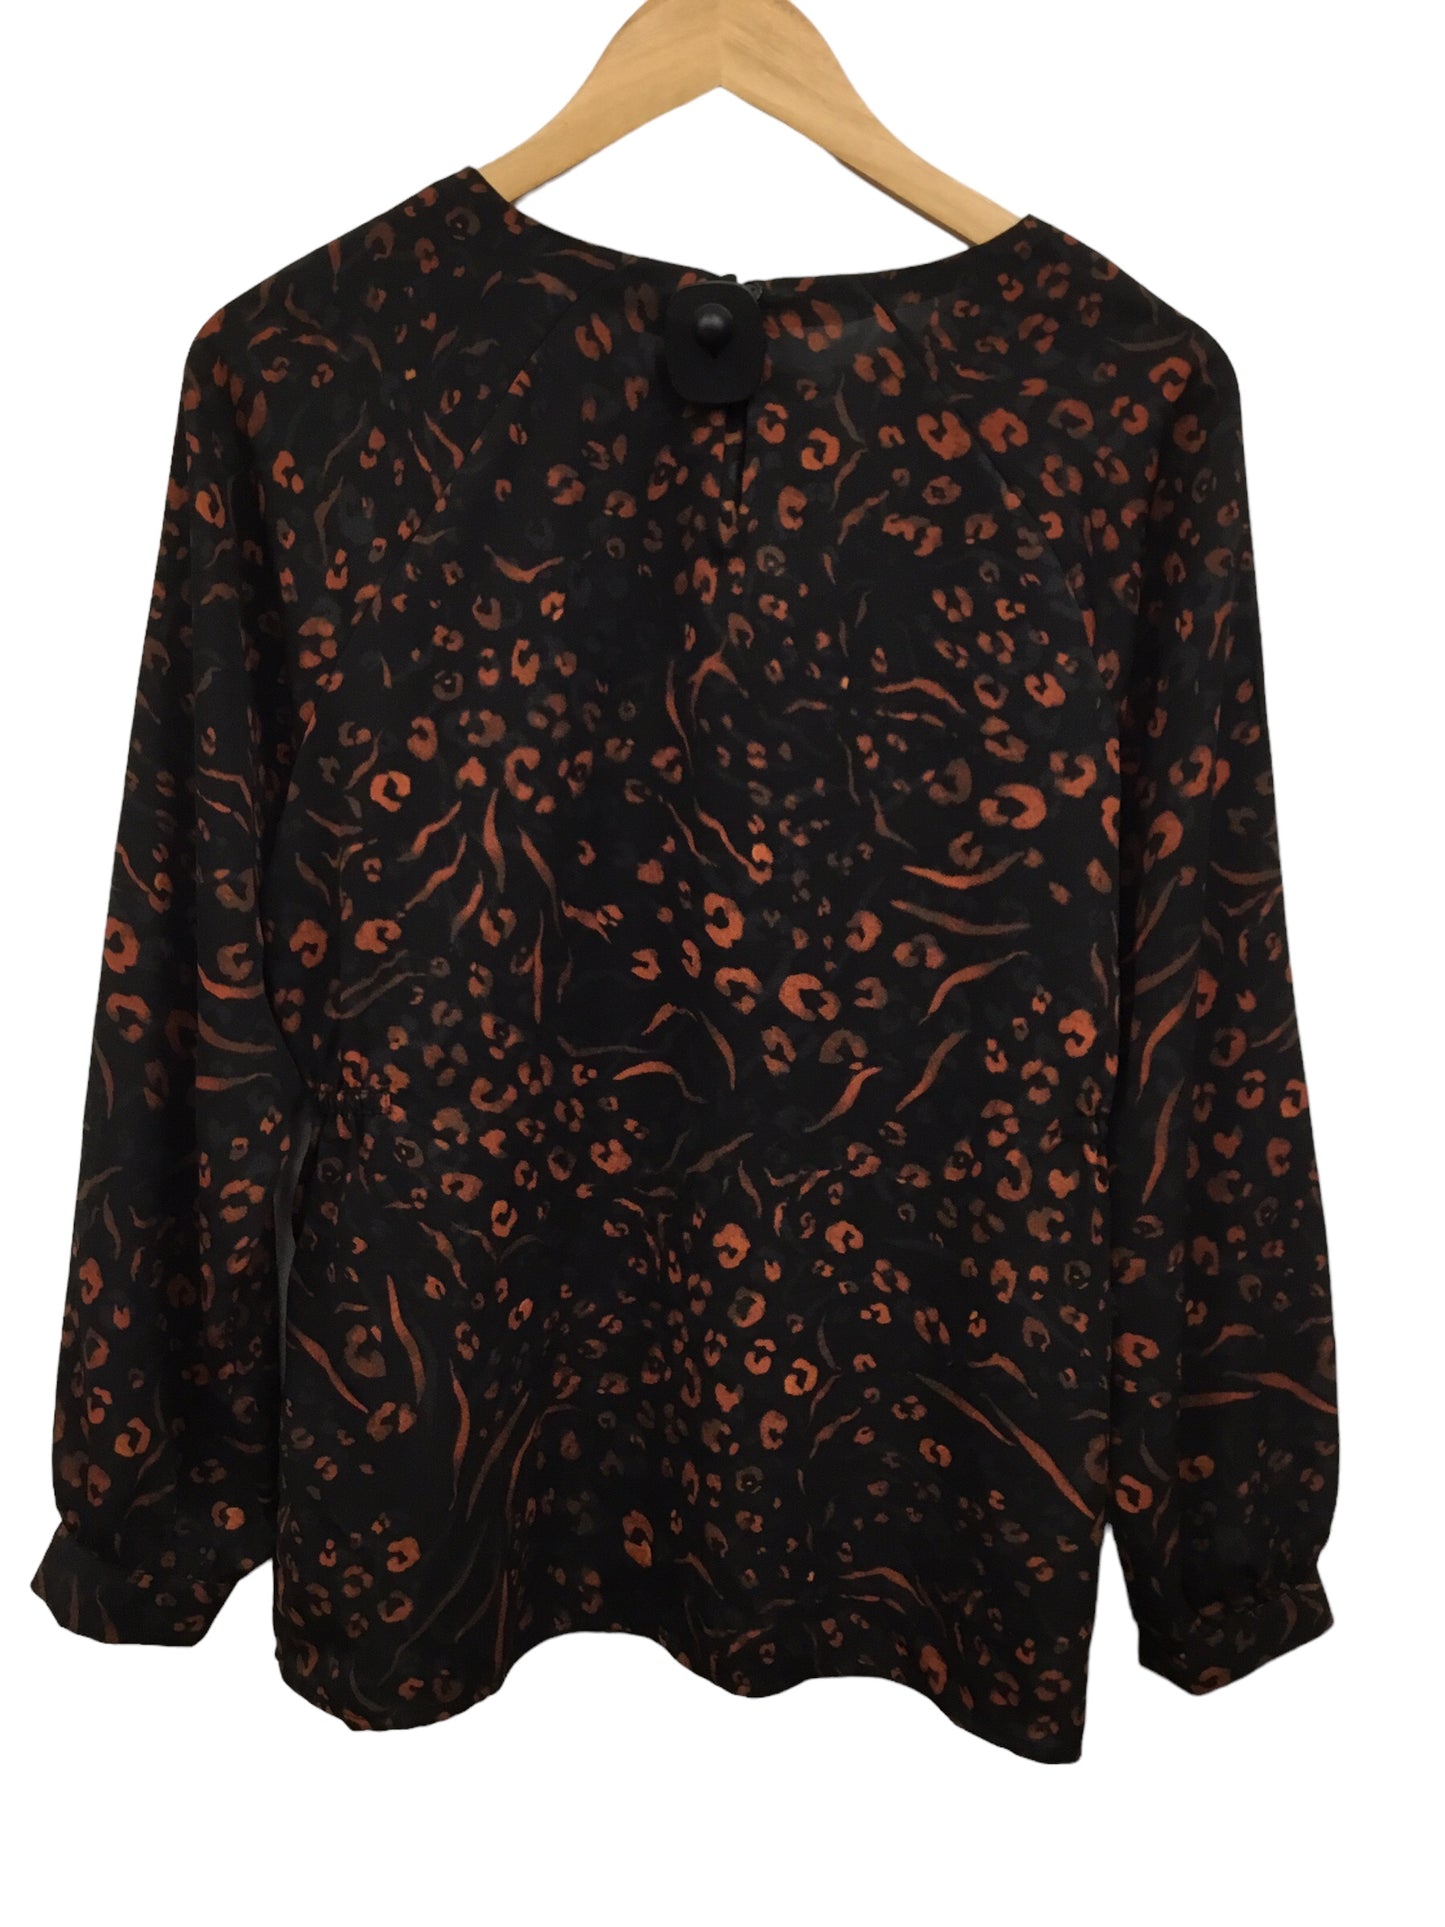 Top Long Sleeve By Nine West  Size: M